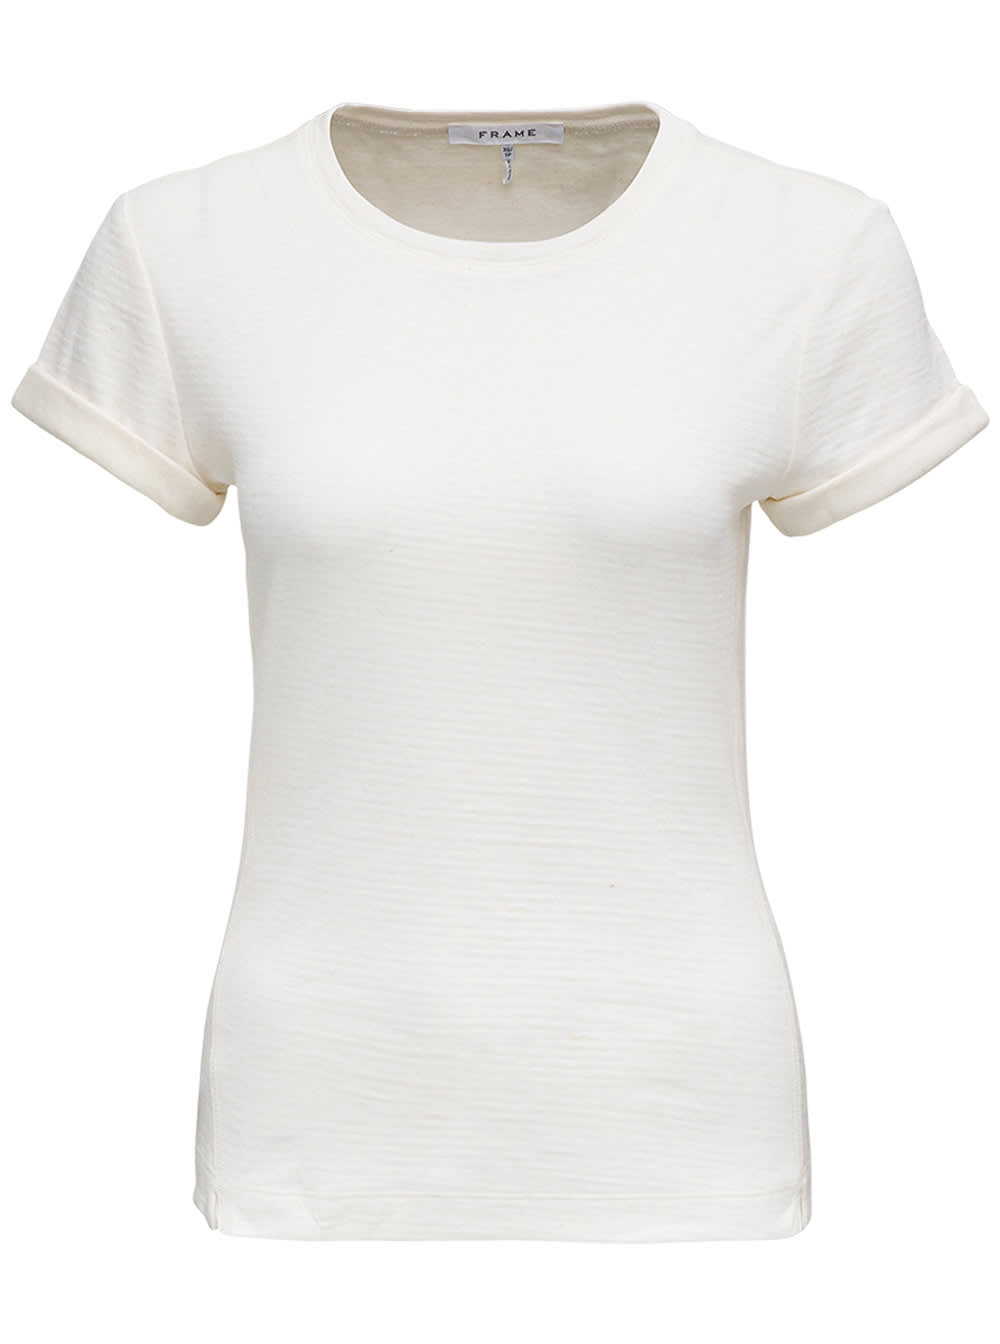 Frame Rolled True White Cotton T-shirt